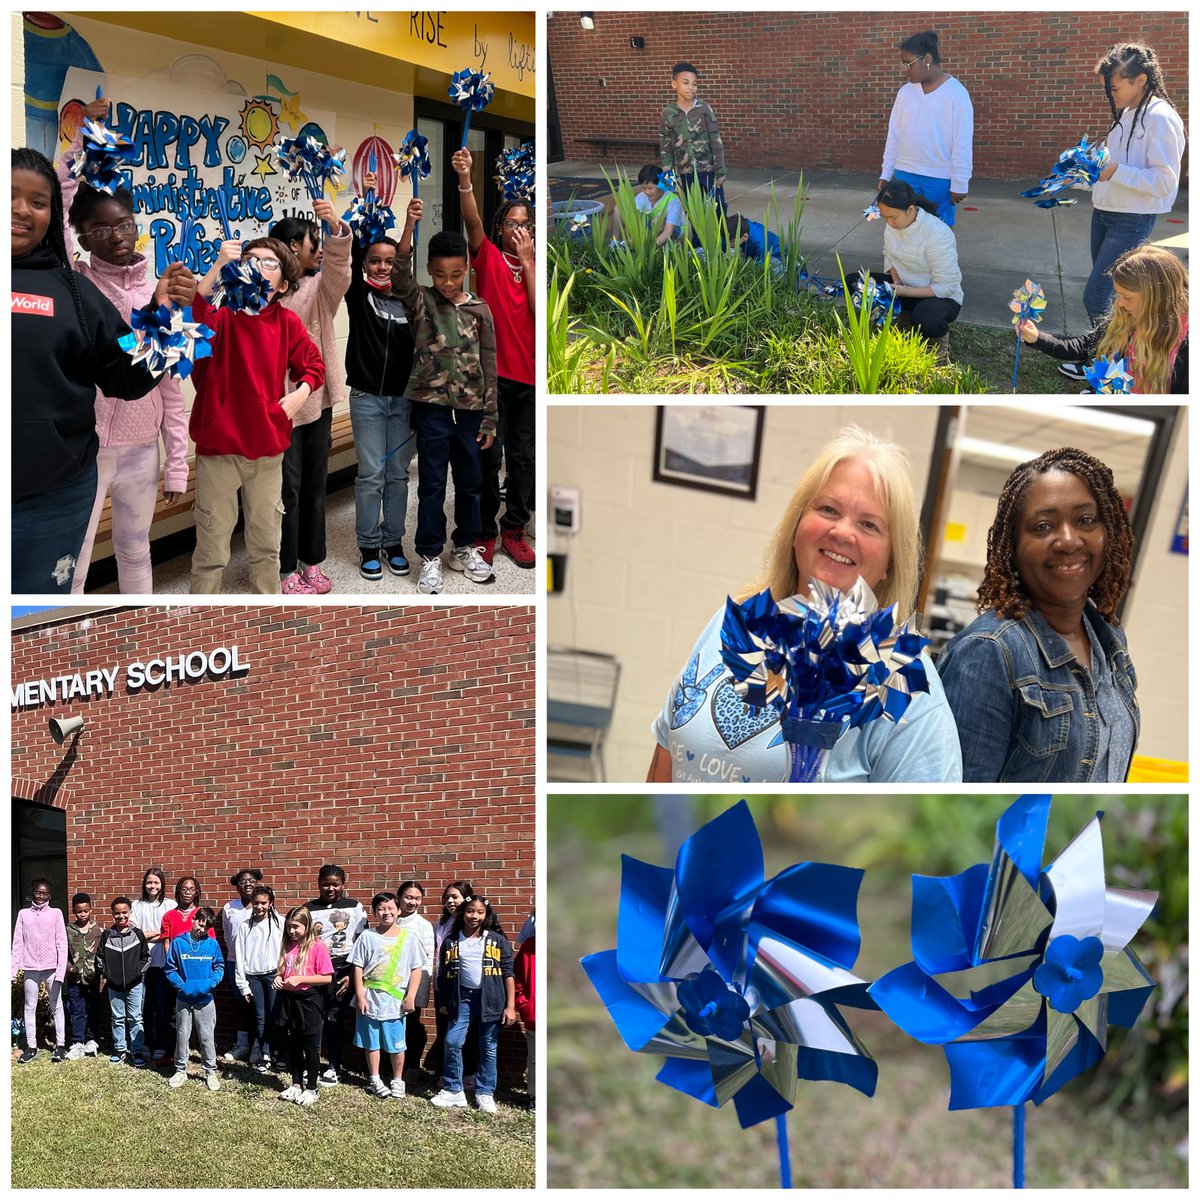 Raising awareness about child abuse prevention is crucial. Pinwheels are a powerful symbol of hope and childhood innocence. It's heart warming to see communities come together to support such an important cause. #BeTheirVoice💙 @tarabratcher3 @JakiaWynn @moonluvr4life